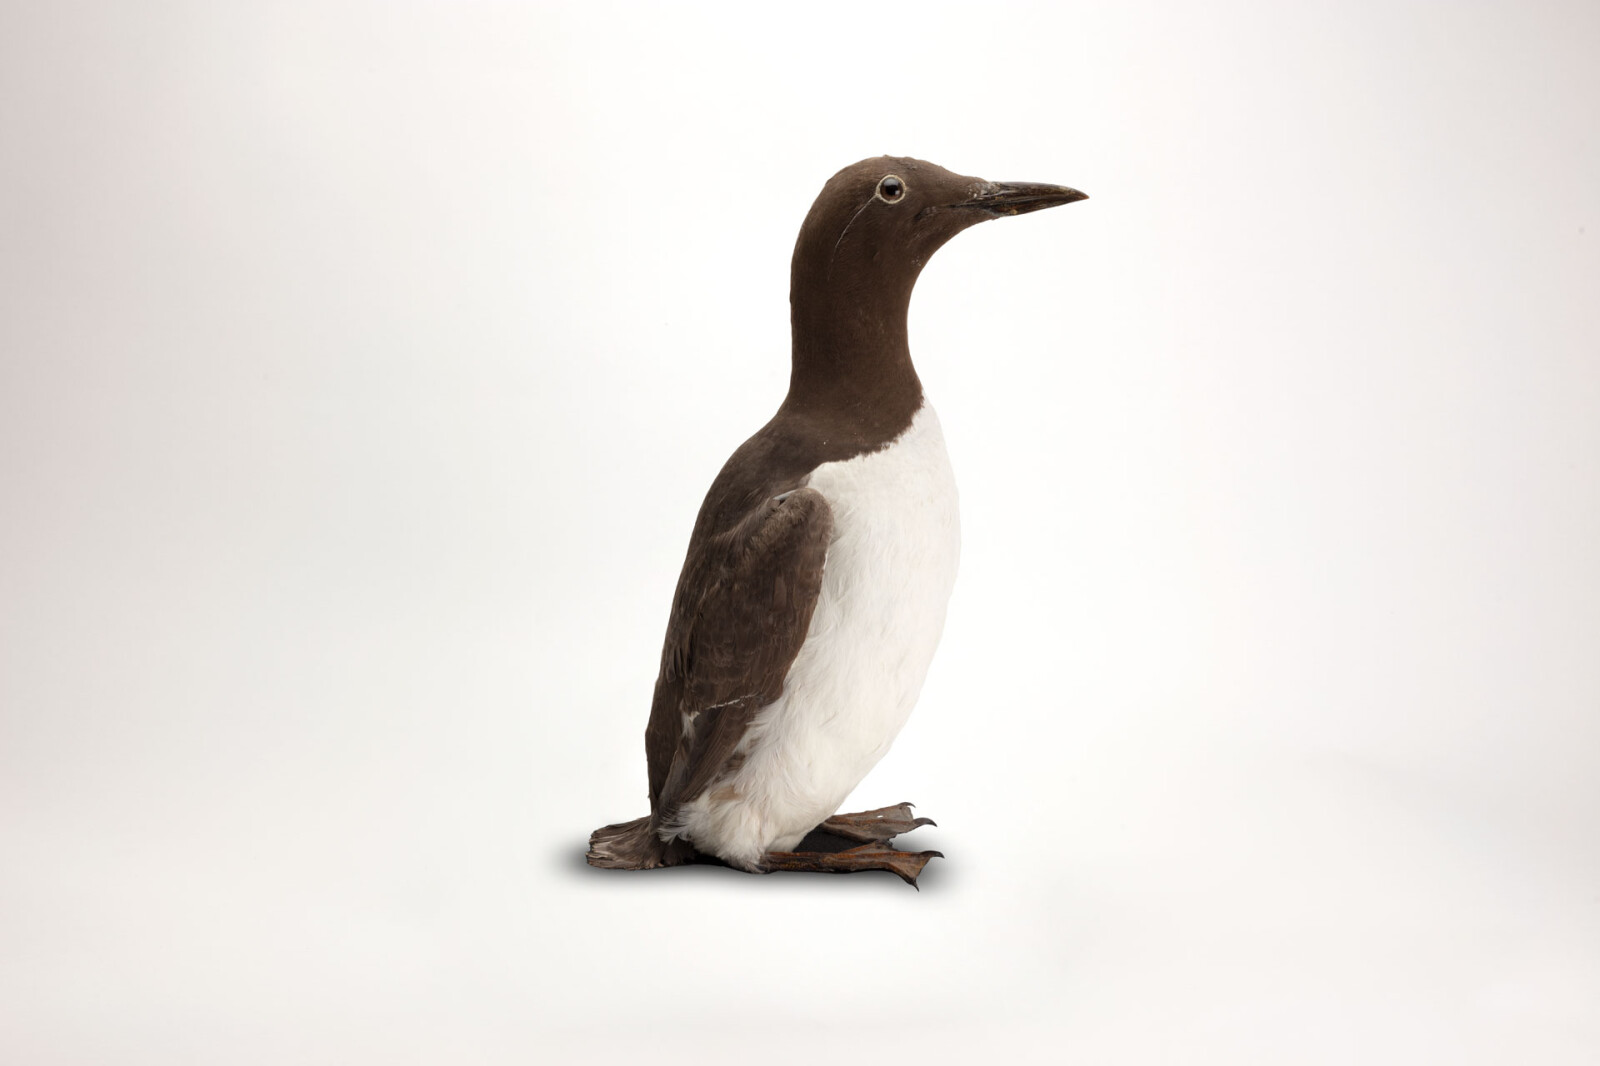 Taxidermy mount of a Guillemot. A seabird with a chocolate brown back and thin bill. 